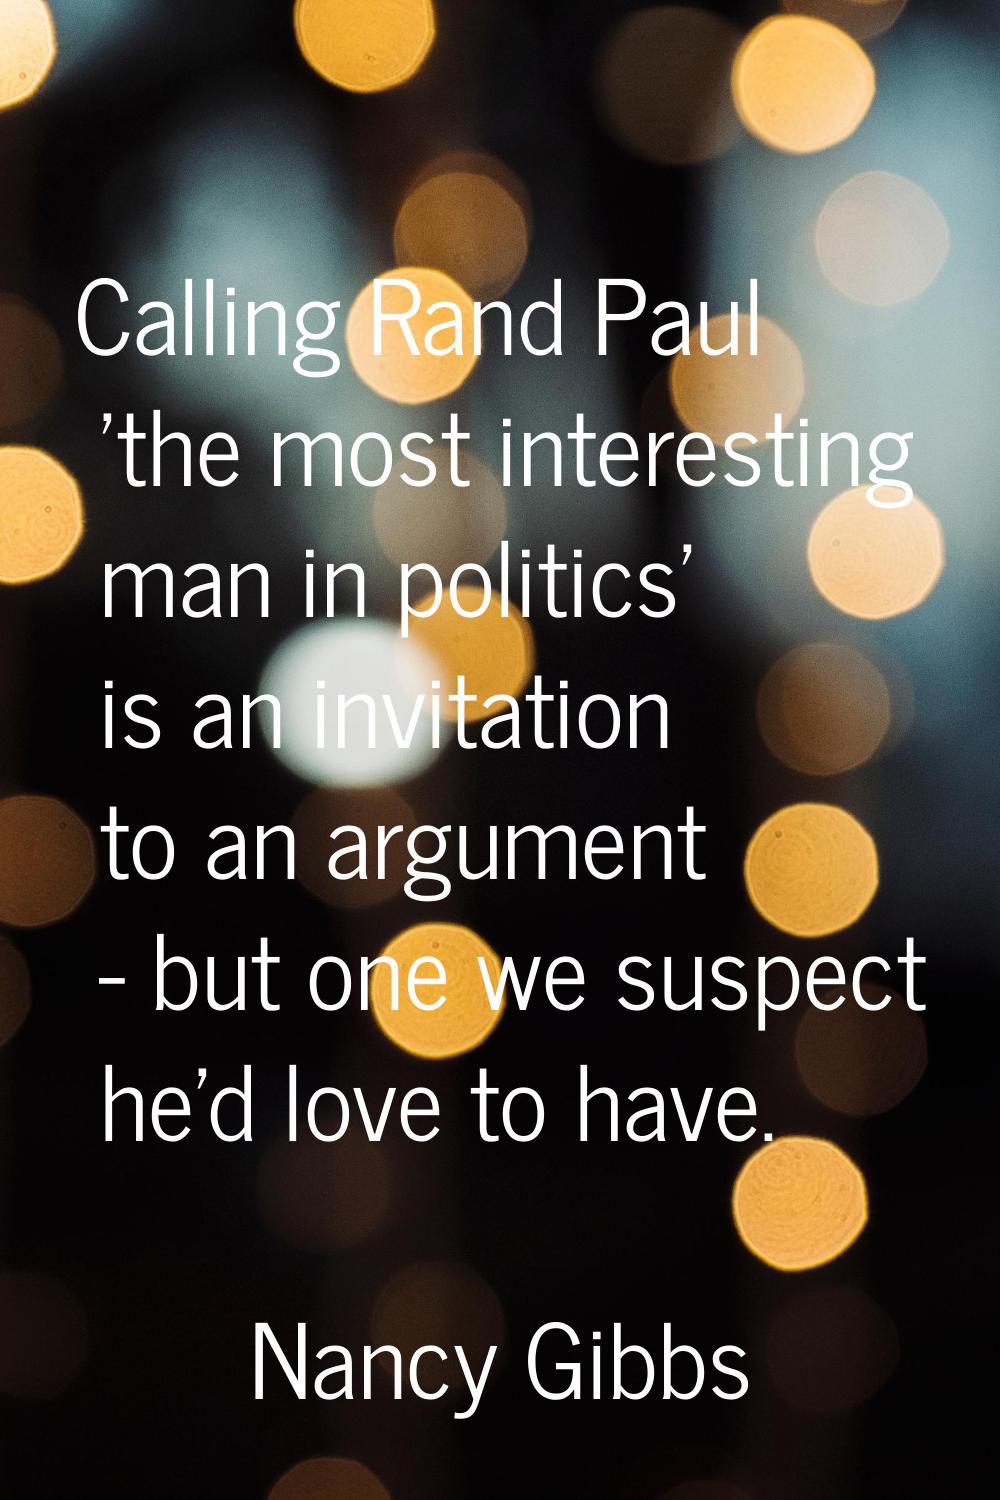 Calling Rand Paul 'the most interesting man in politics' is an invitation to an argument - but one 